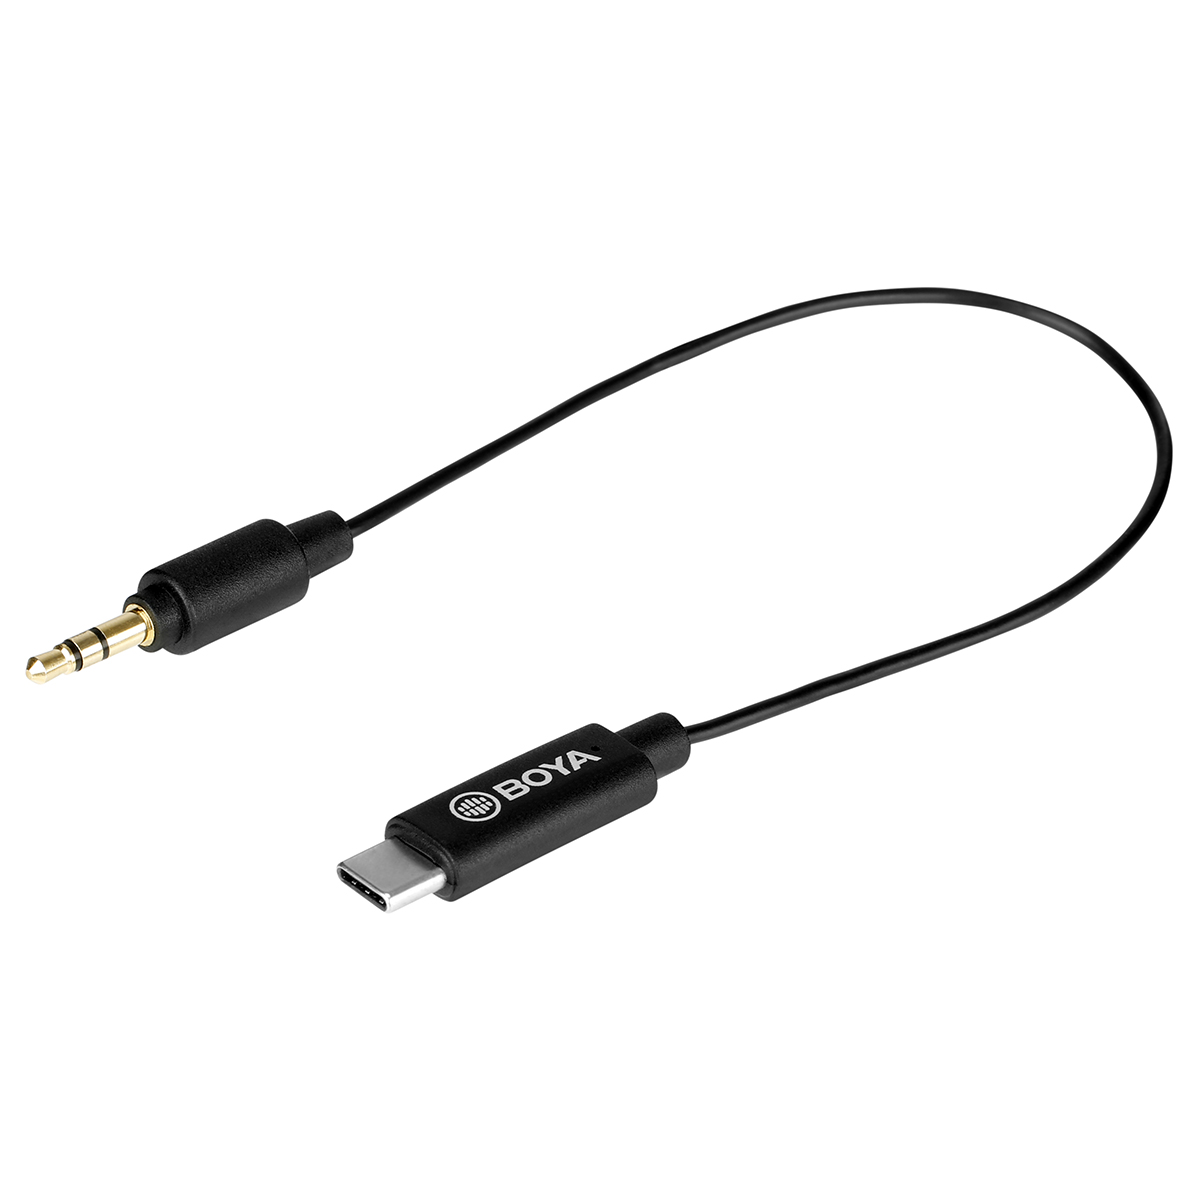 CABLE BOYA TRS 3.5 A USB TIPO C MOD. BY-K2